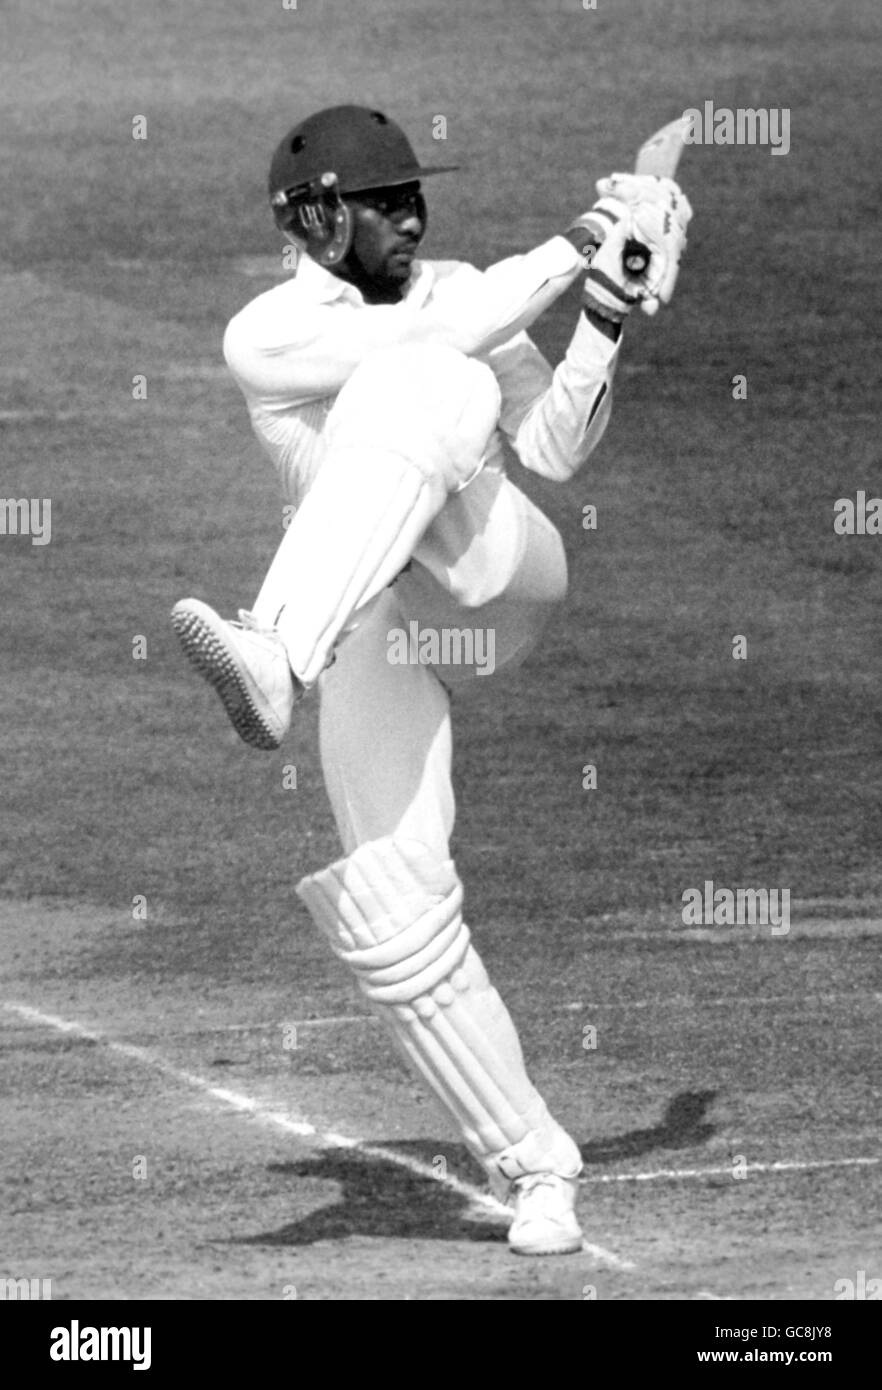 Cricket - Middlesex v Essex Britannic Assurance County Championship 1985 Venue Lord's Cricket Ground, St John's Wood. Middlesex batsman Neil Williams shows a one-legged style during his innings in the Britannic Assurance Country Championship match Stock Photo